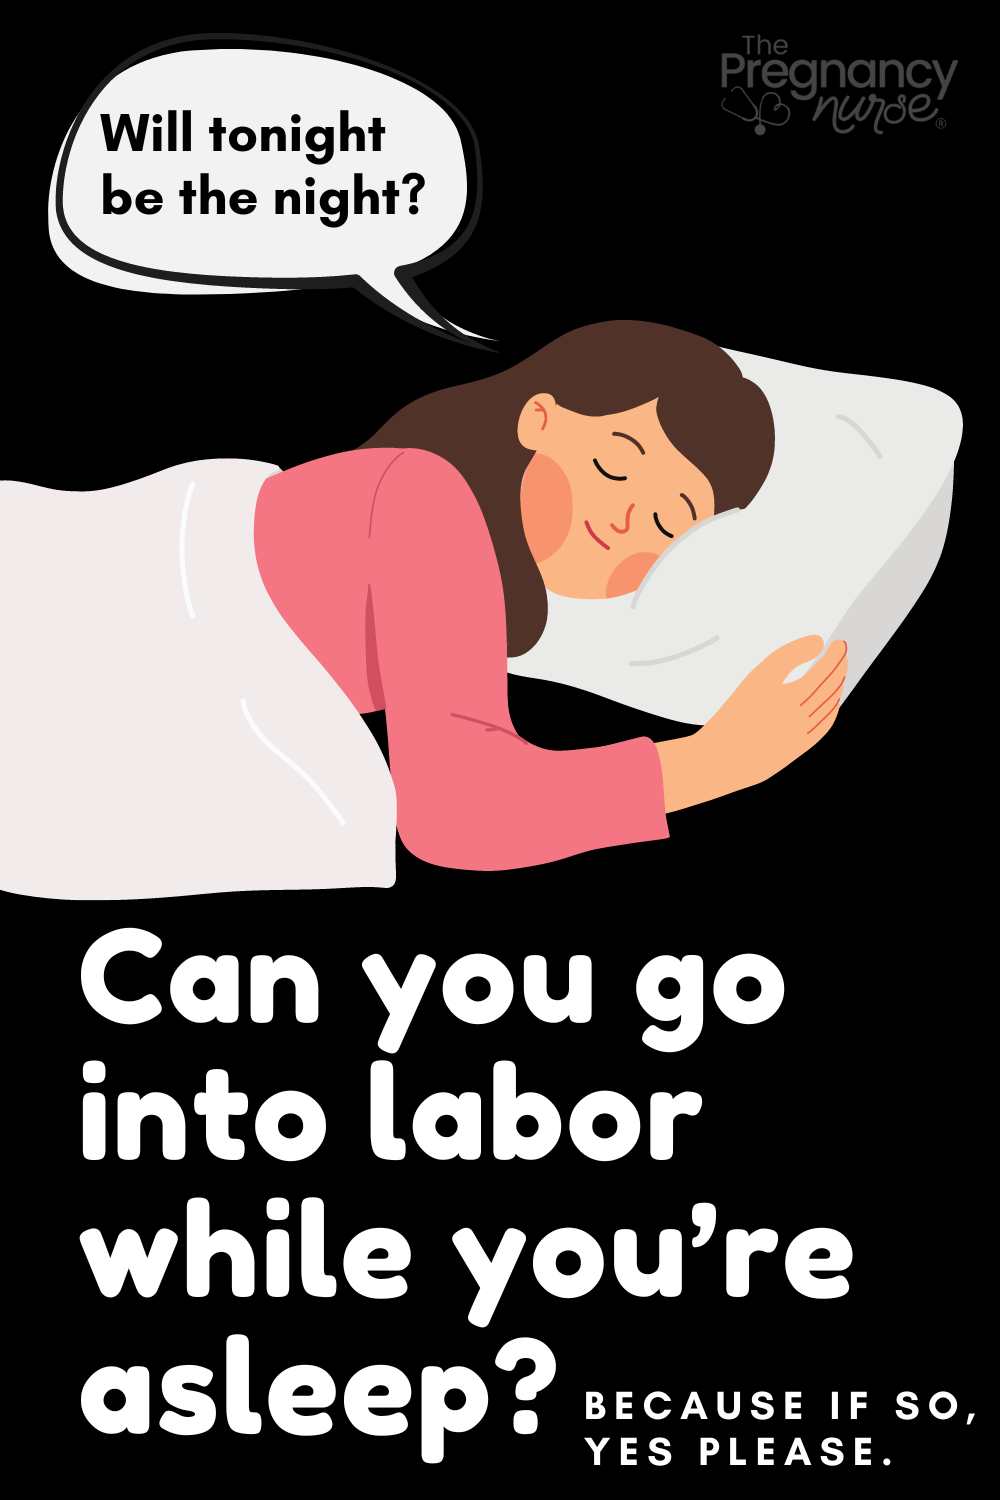 Can labor start while you're sleeping? Can you sleep through early labor? How can you sleep through some of labor. Let's explore those topics.